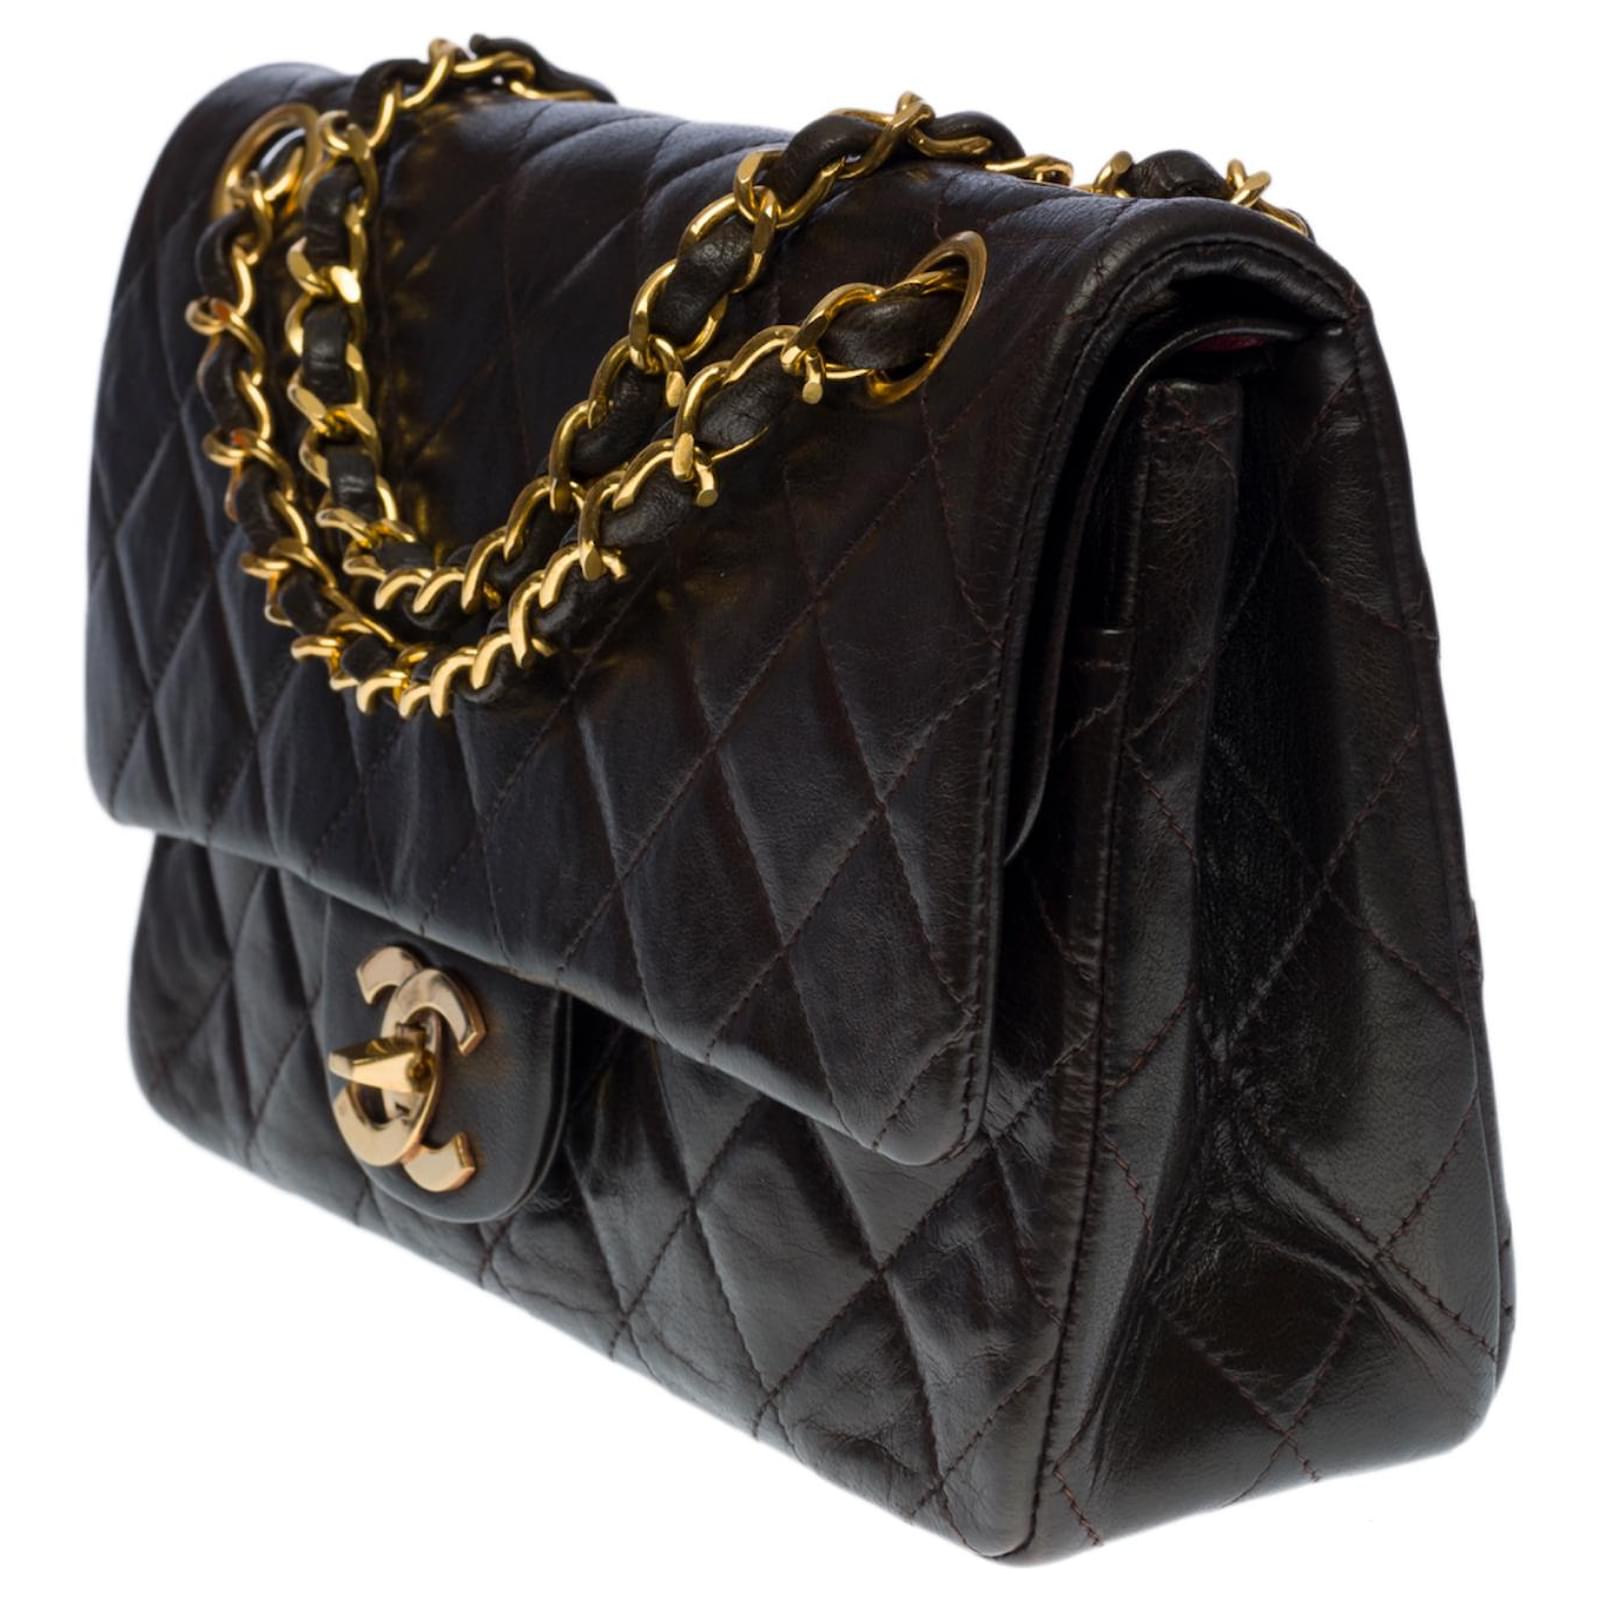 Chanel Brown Quilted Leather CC Timeless Pocket Shoulder Bag Chanel | The  Luxury Closet